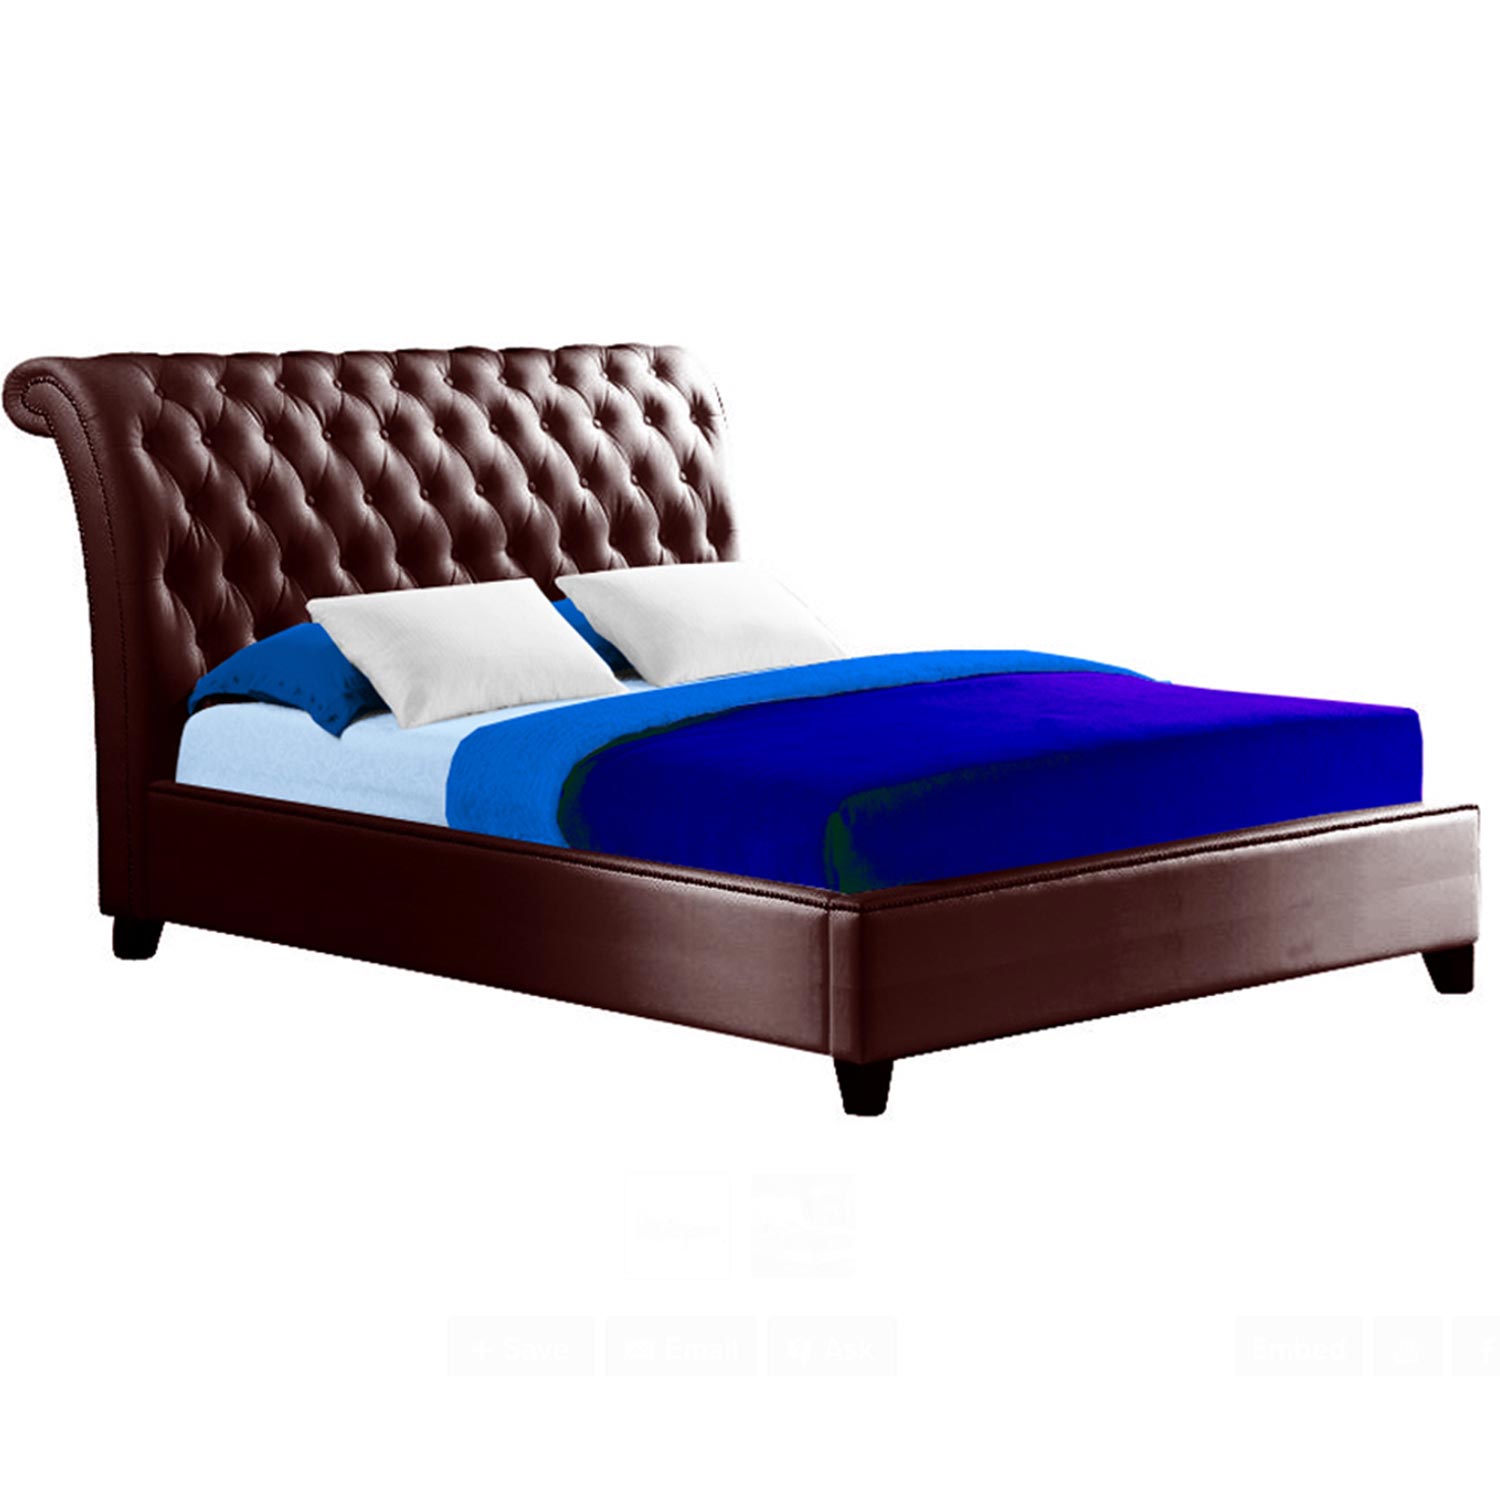 SOFT BROWN TUFTED BED - KING SIZE